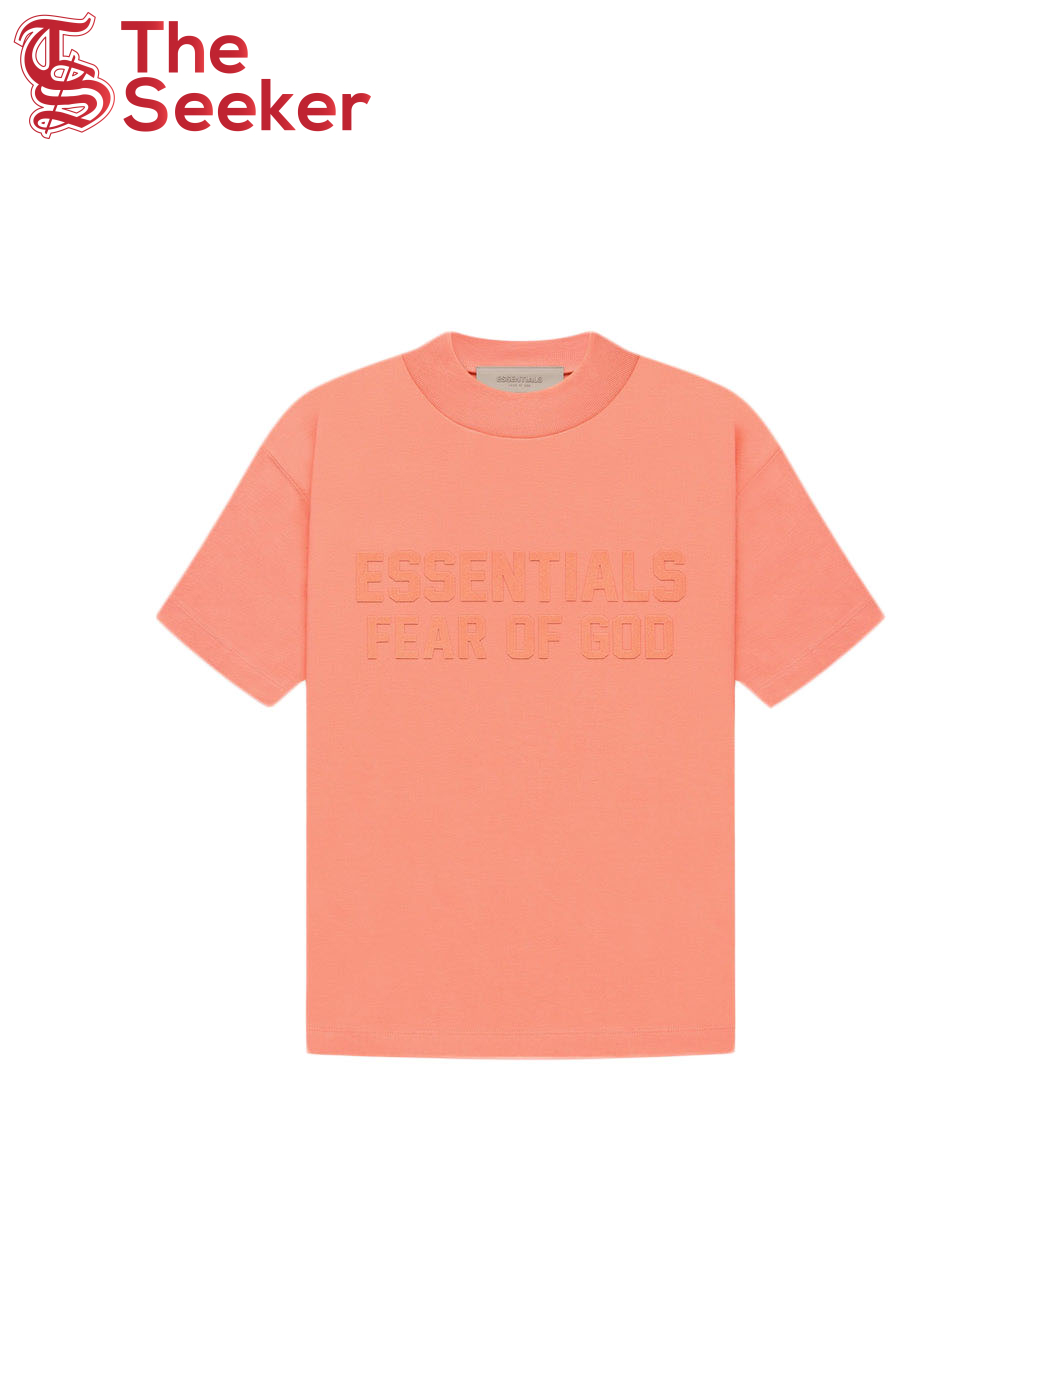 Fear of God Essentials Kids S/S T-shirt Coral